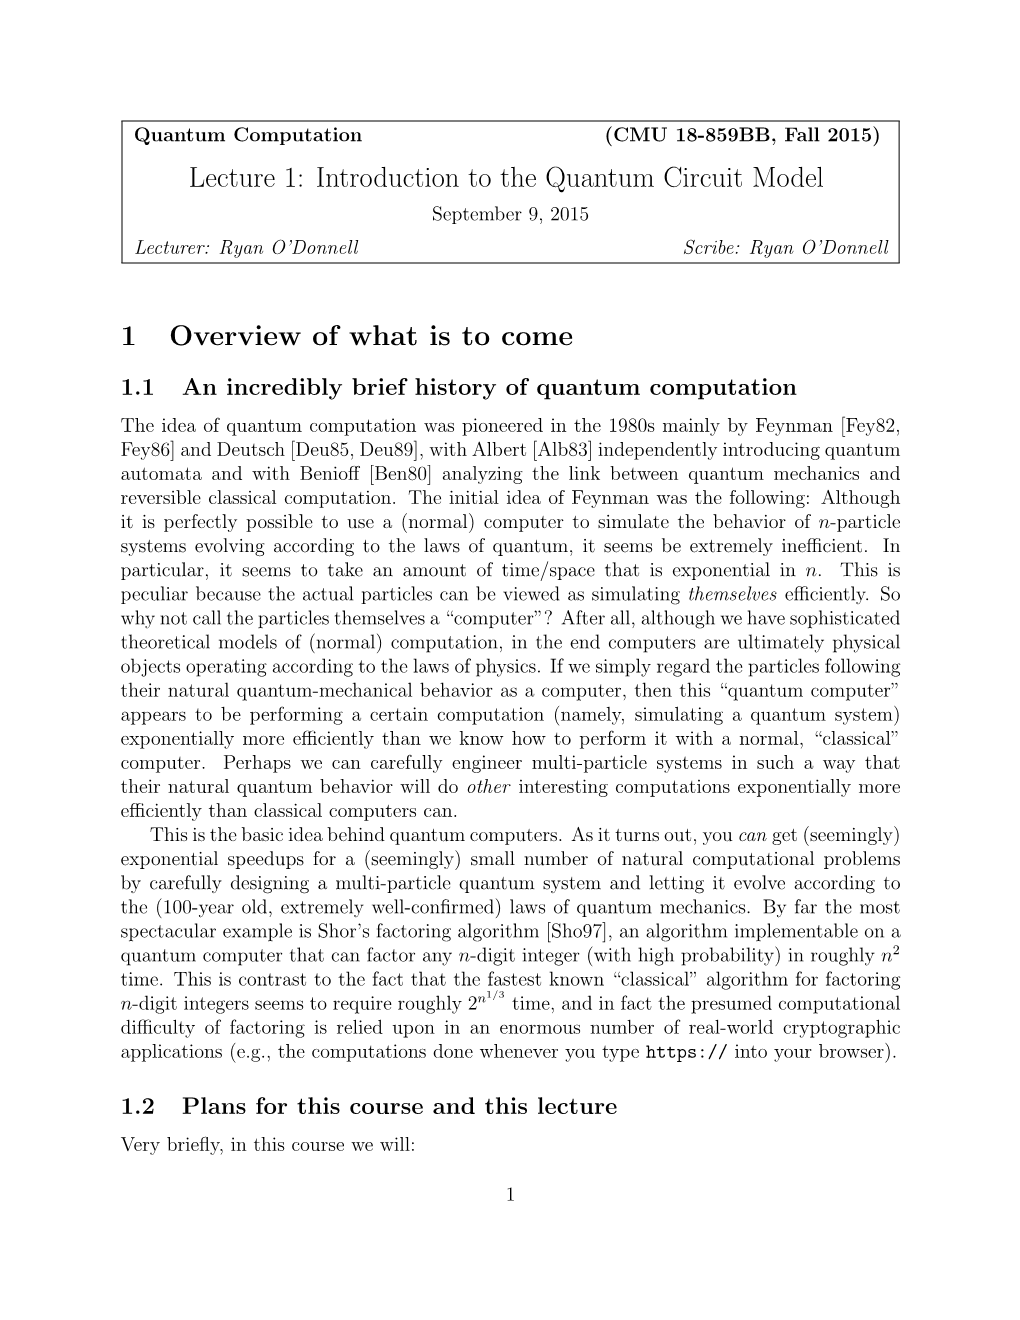 Lecture 1: Introduction to the Quantum Circuit Model September 9, 2015 Lecturer: Ryan O’Donnell Scribe: Ryan O’Donnell